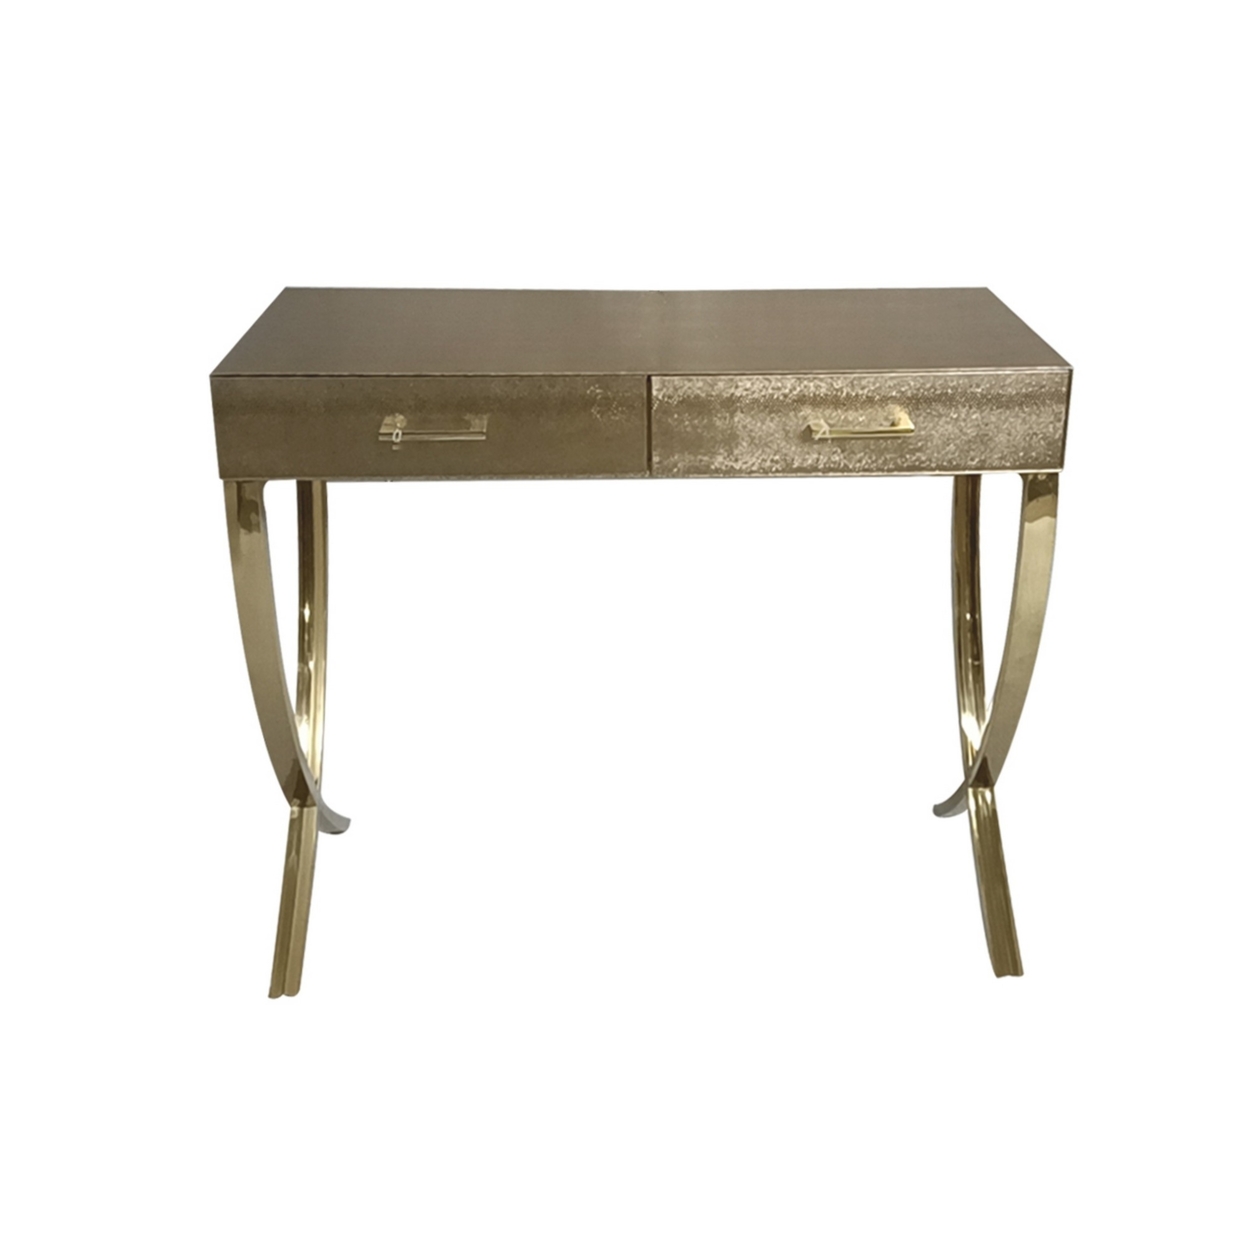 39 Inch Sofa Console Table, 2 Drawers, Vegan Faux Leather, Champagne Gold- Saltoro Sherpi